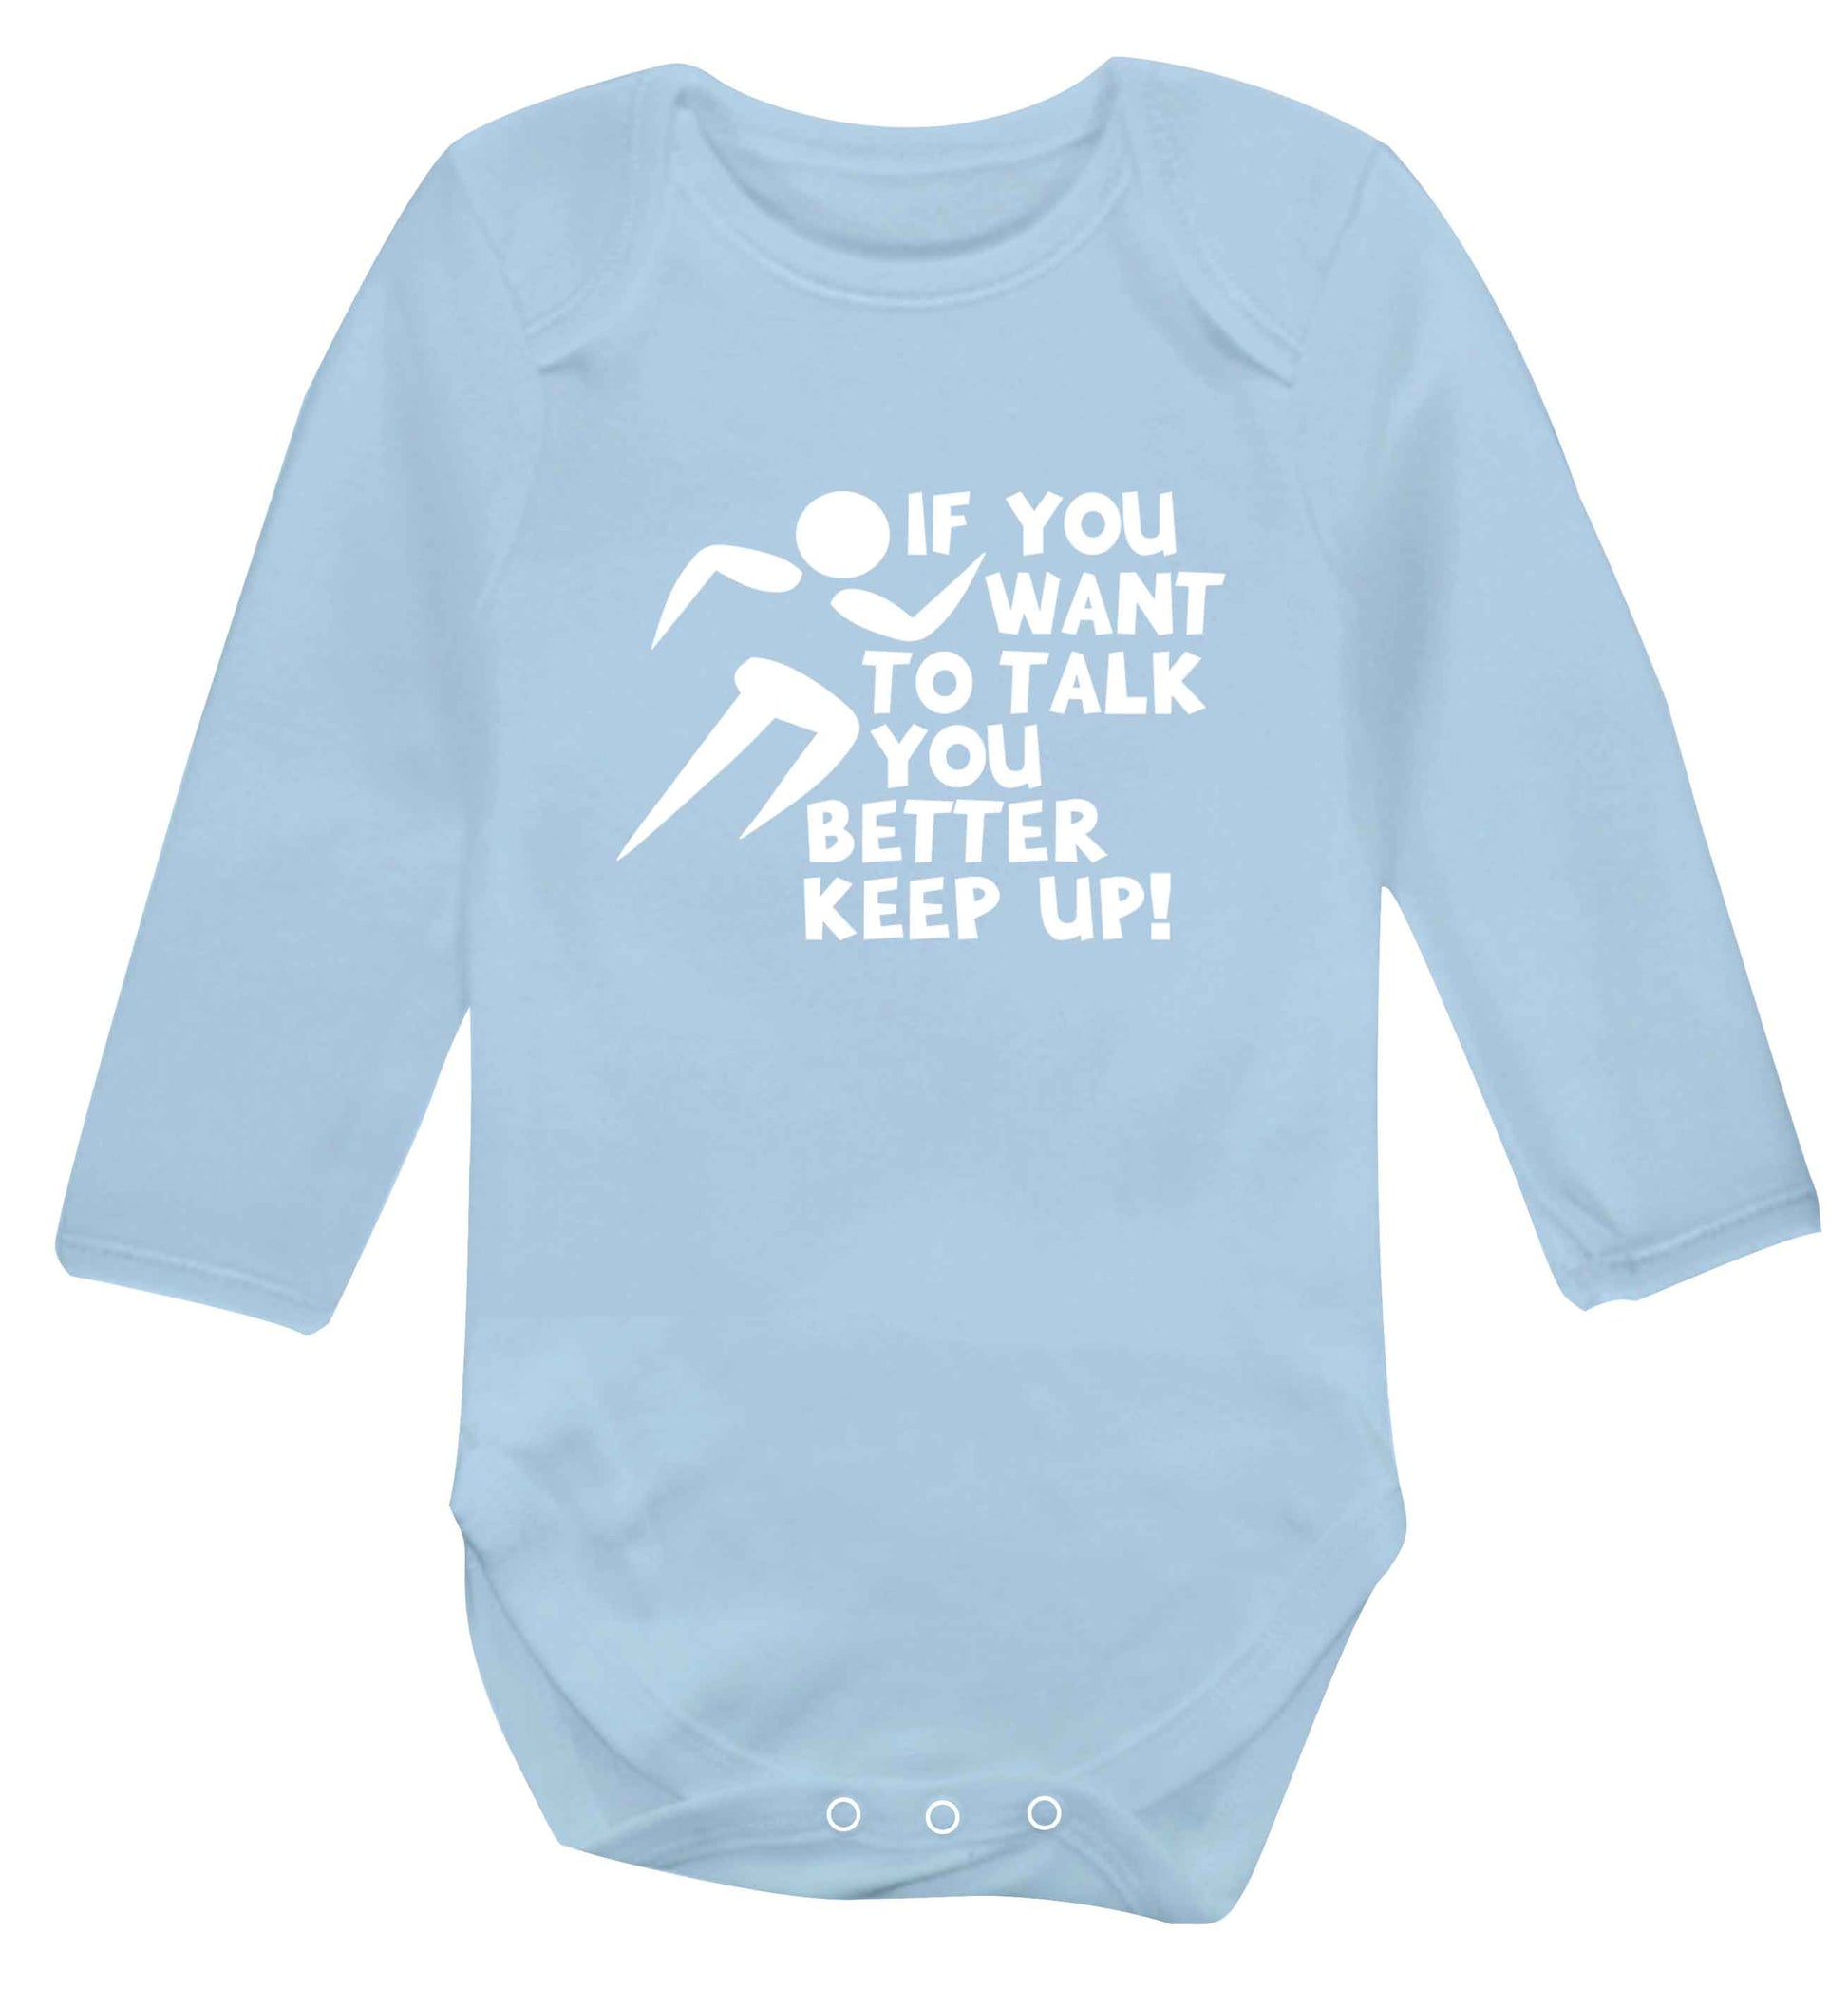 If you want to talk you better keep up! baby vest long sleeved pale blue 6-12 months